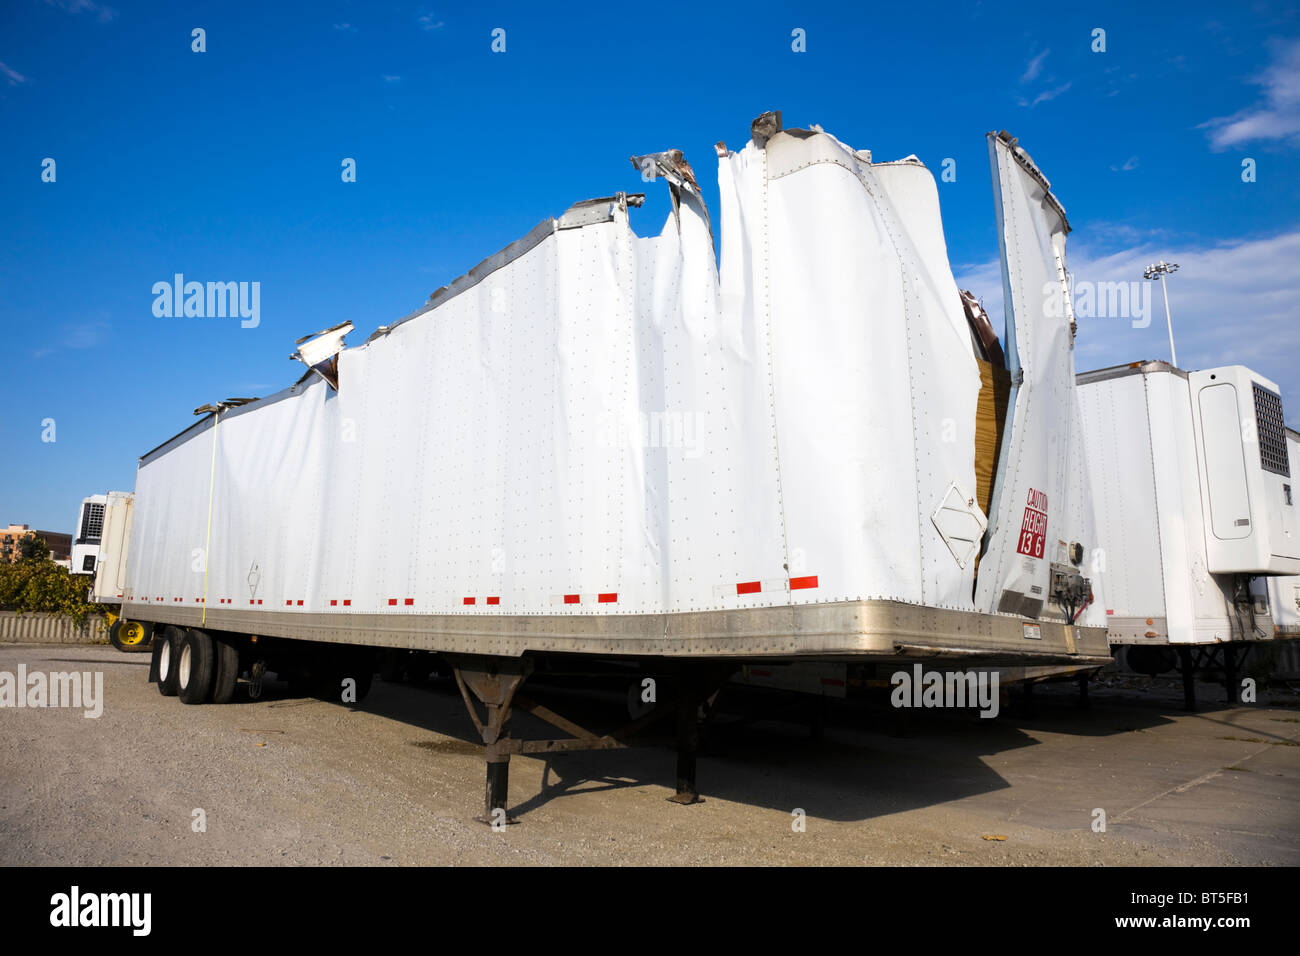 White trailer after accident against blue sky. Stock Photo